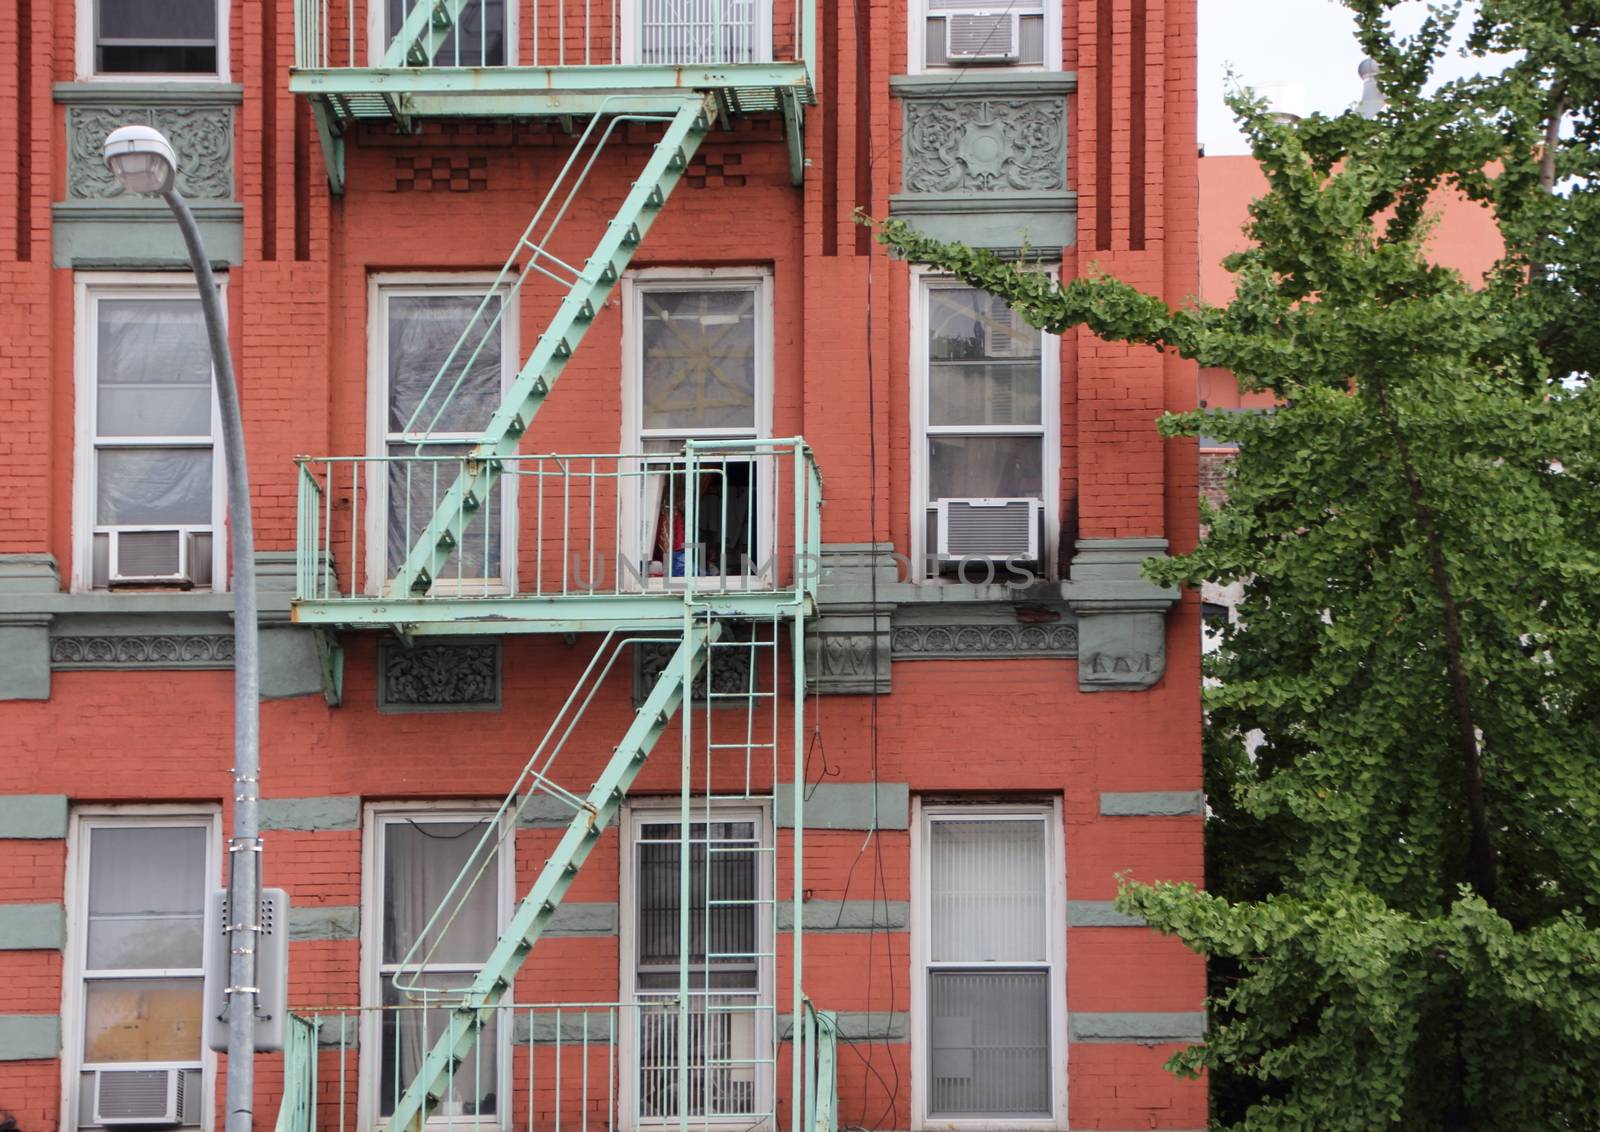 Green Metal Fire Escapes on Old Red Building by HoleInTheBox